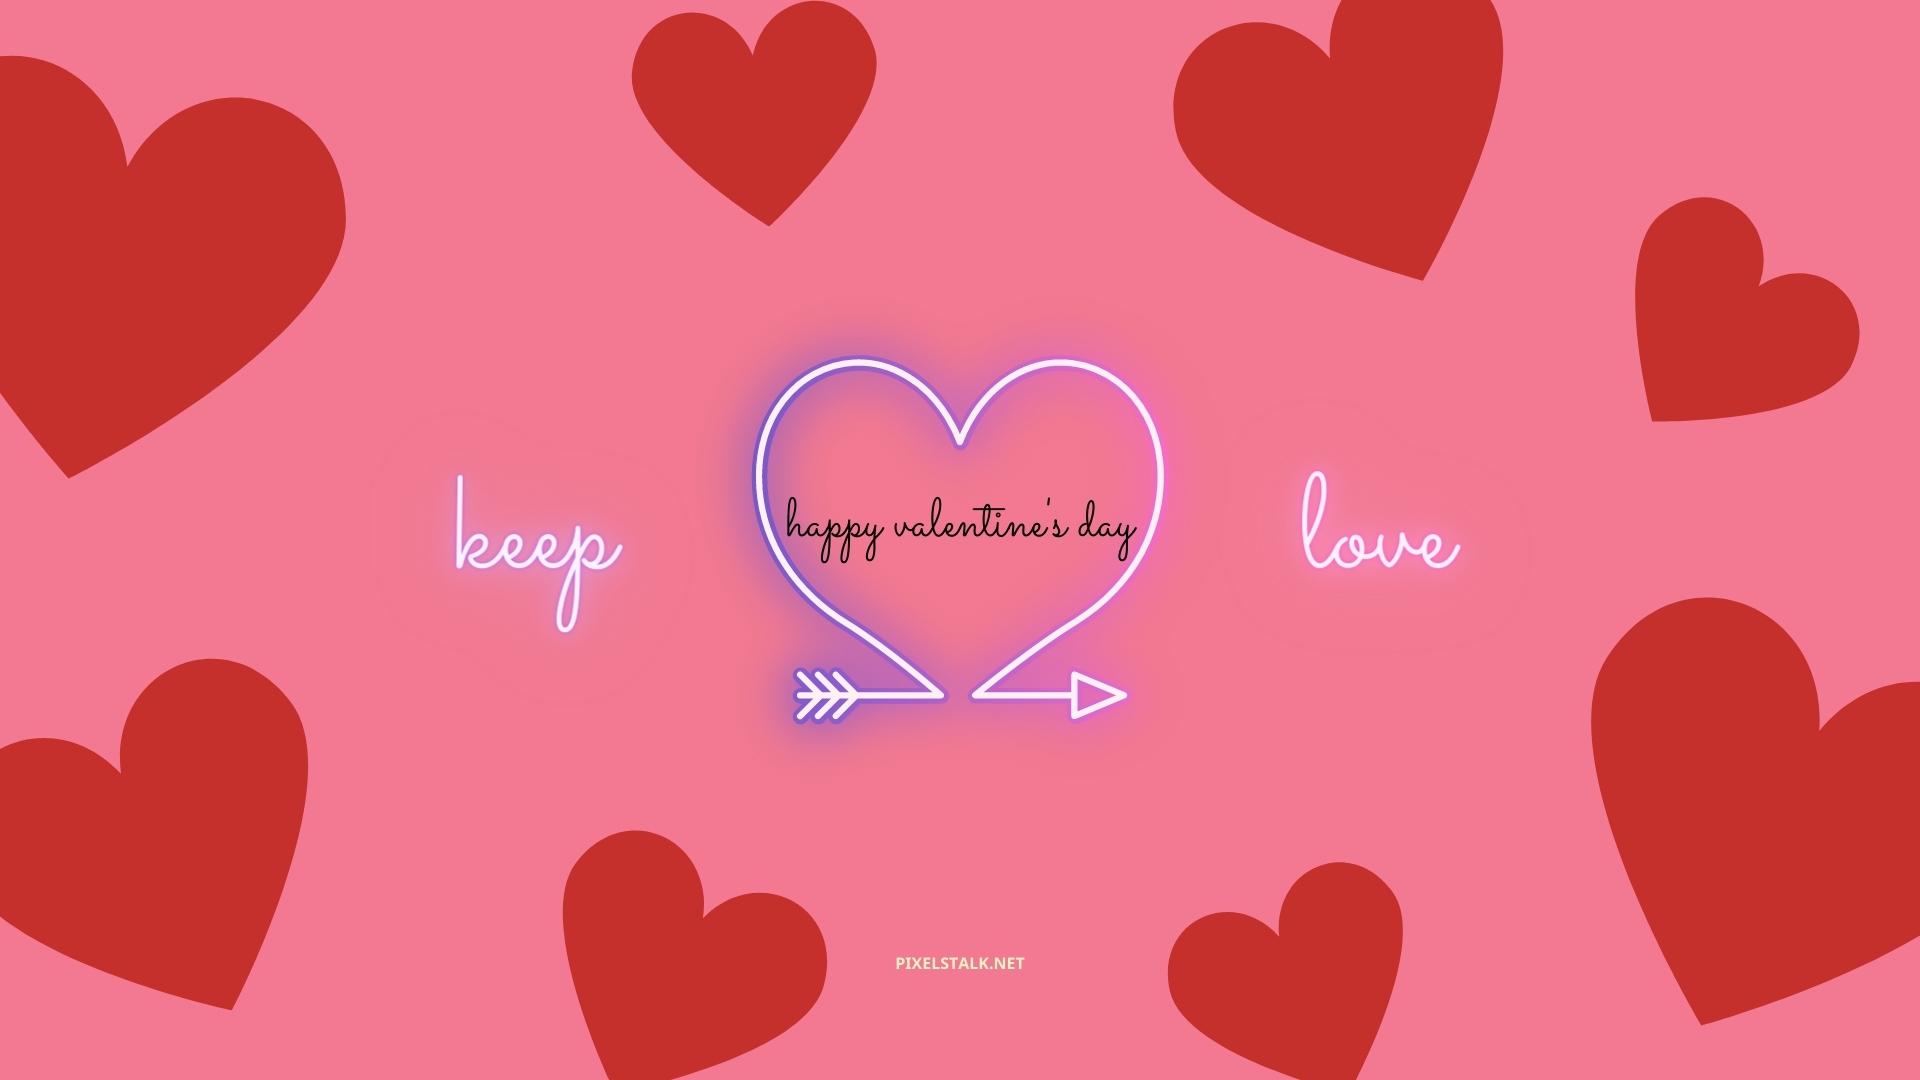 NawPic  Preppy Valentines Day Download httpswwwnawpiccompreppy valentinesday15 Download Preppy Valentines Day Wallpaper for free use  for mobile and desktop Discover more aesthetic valentines flower heart  iphone love Wallpaper  Facebook